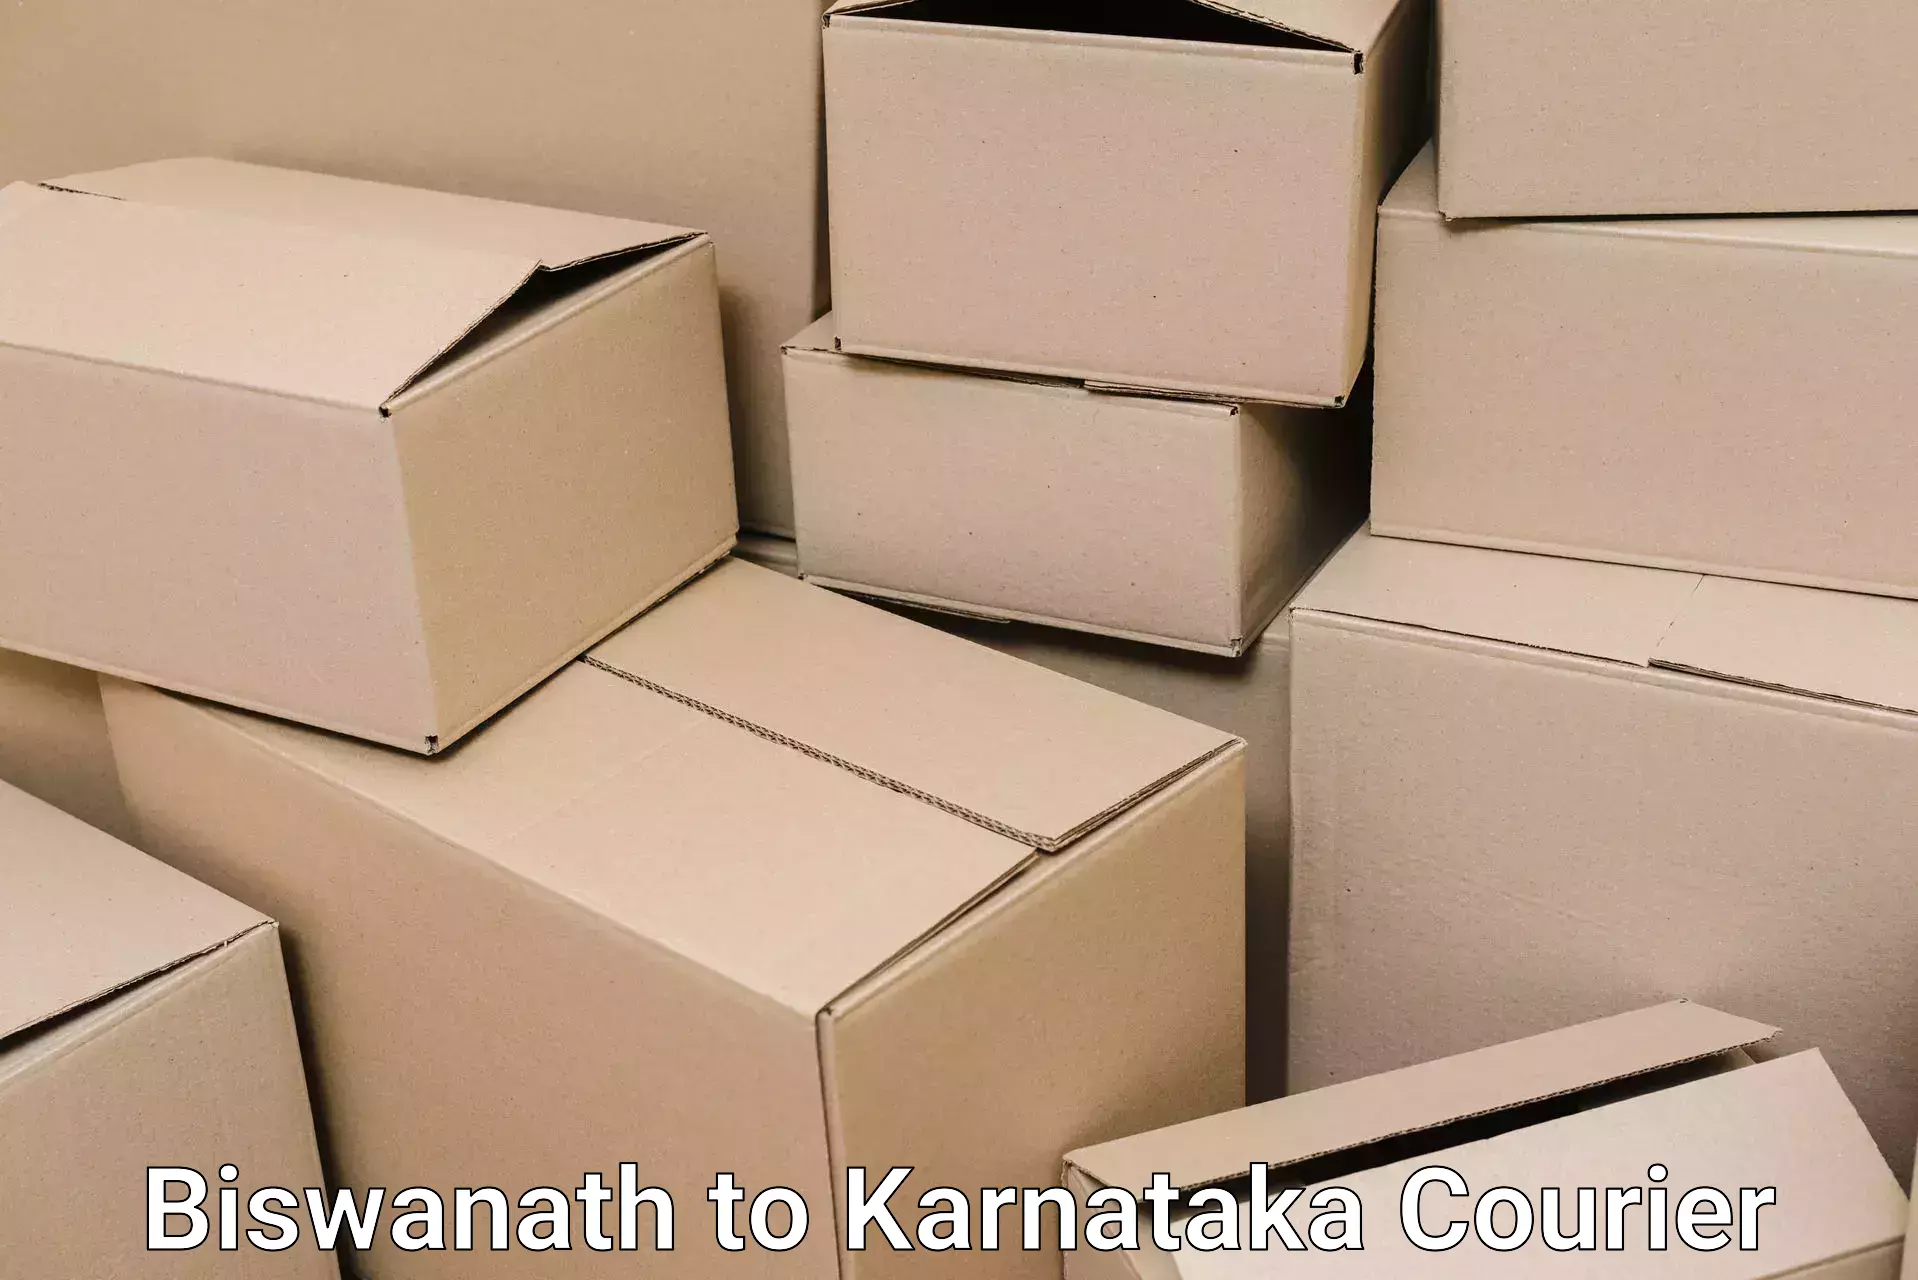 Reliable relocation services in Biswanath to Chittapur